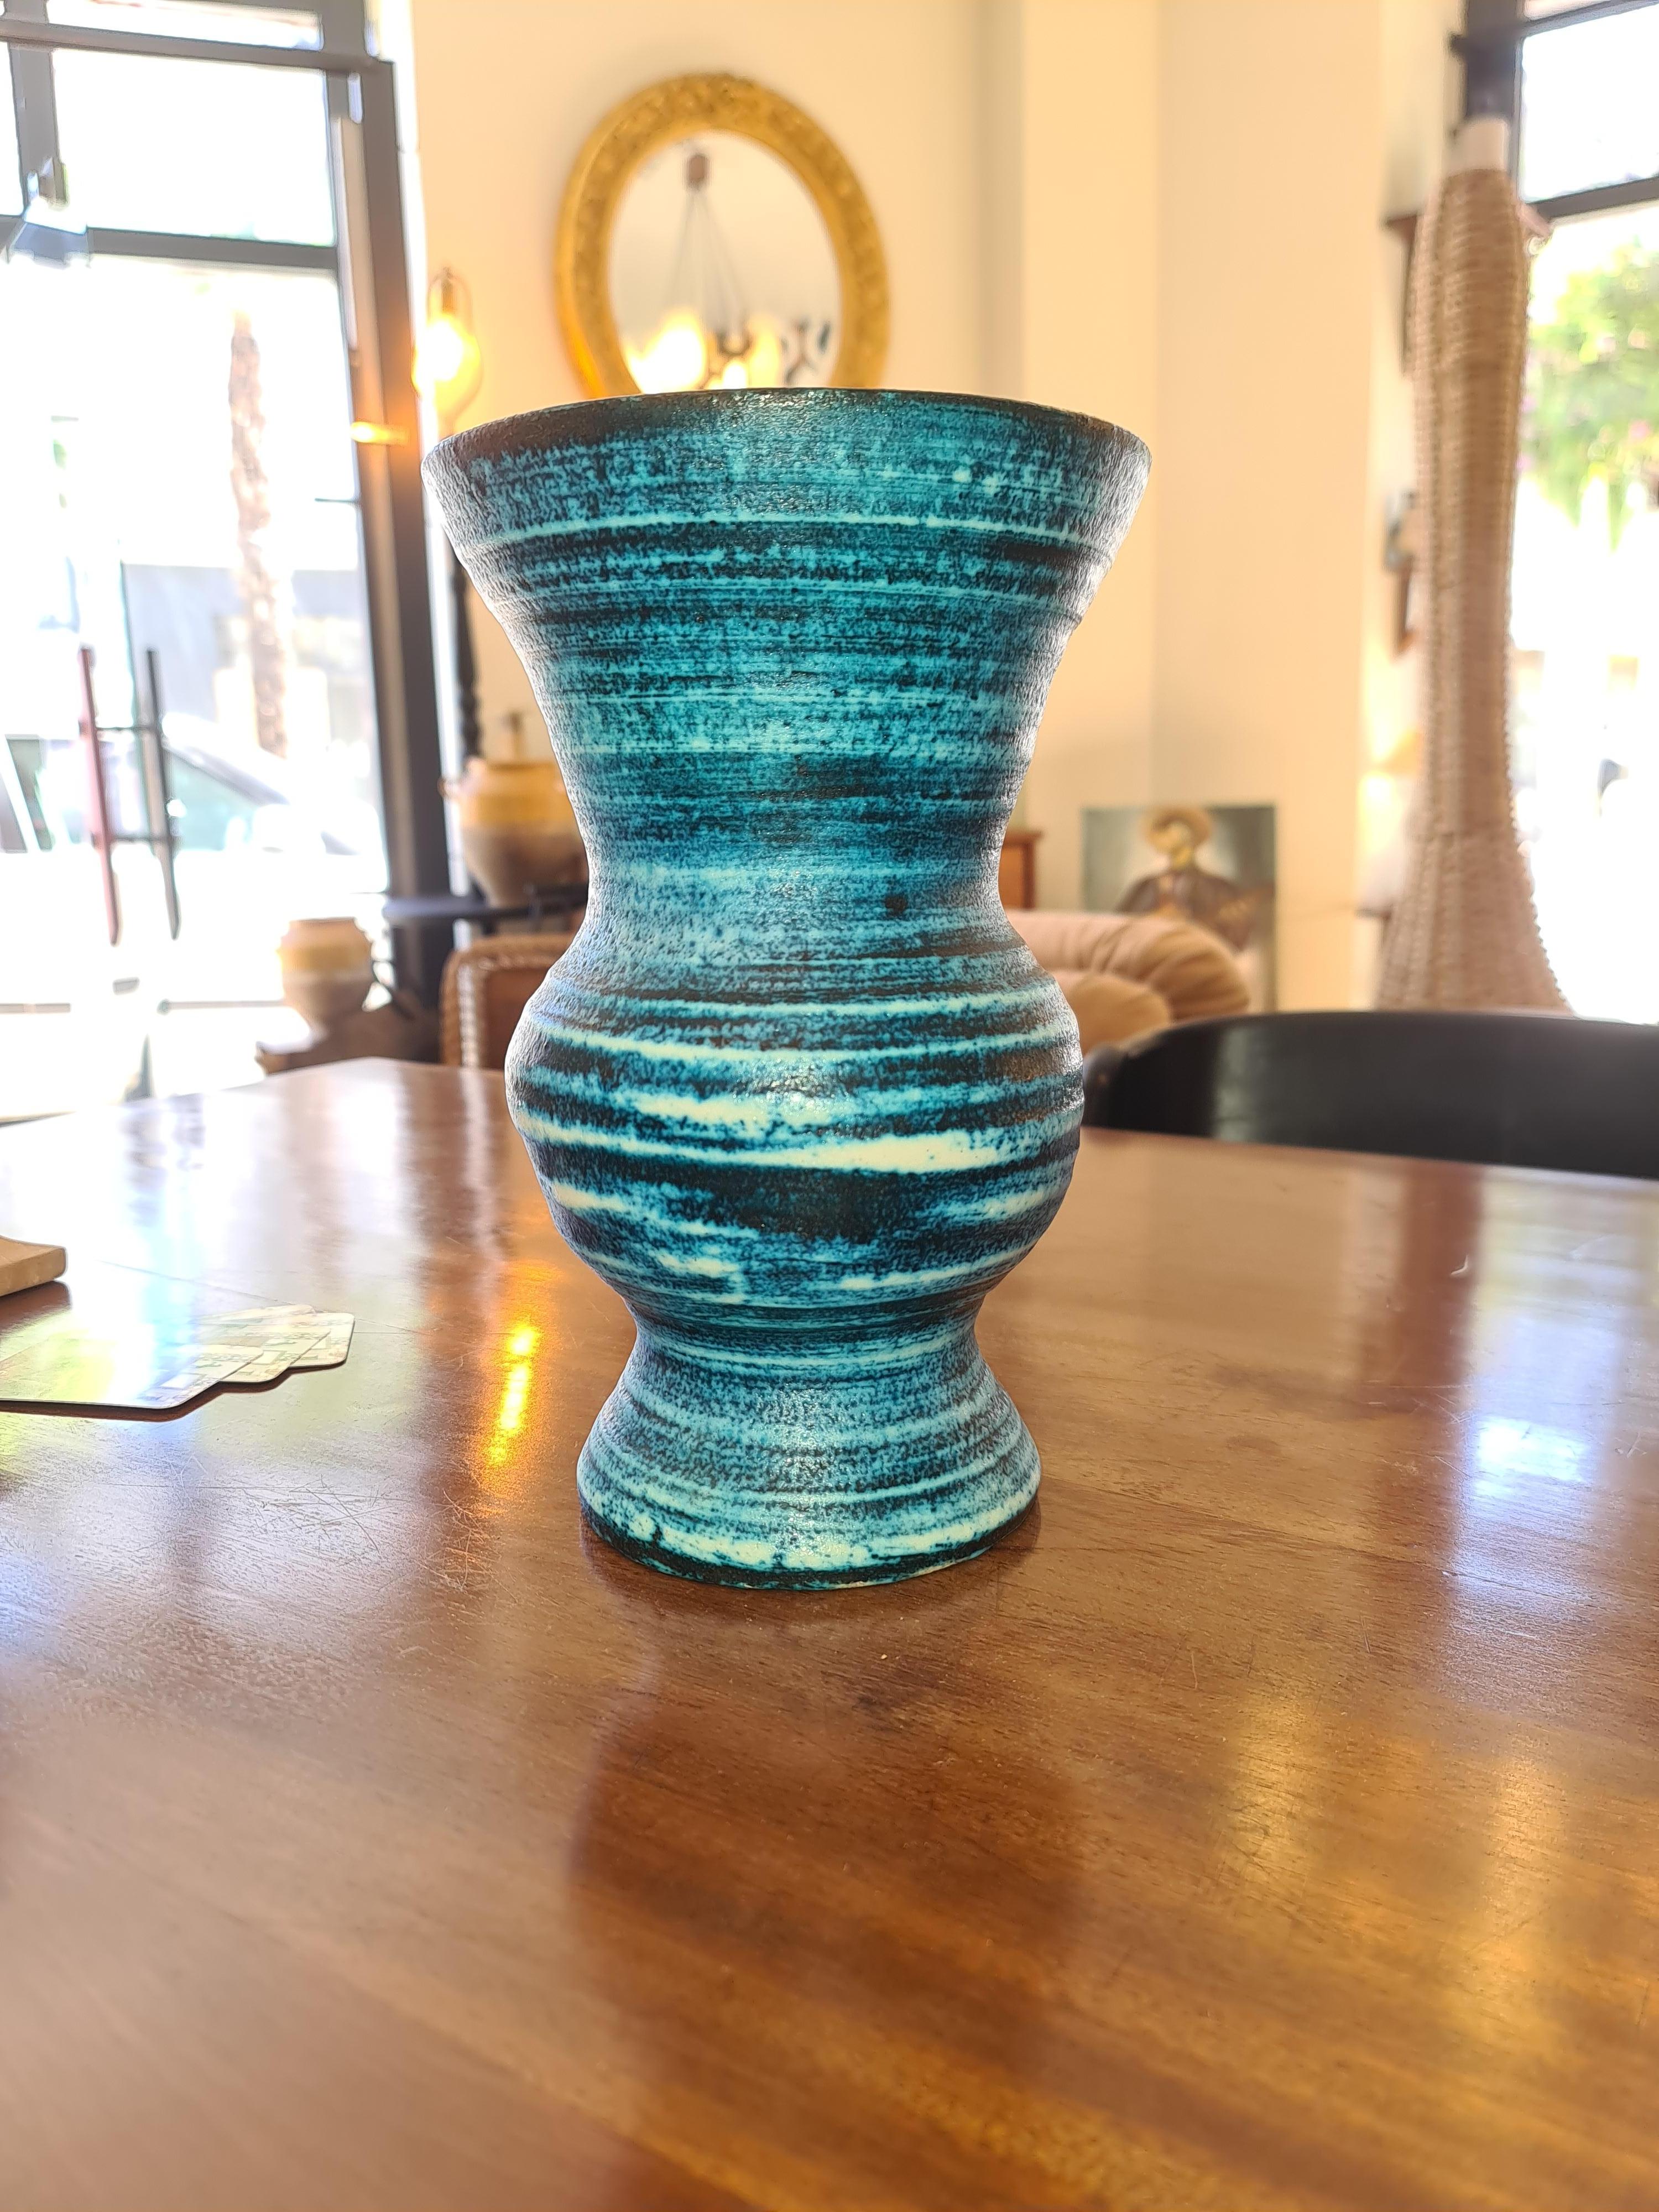 Magnificent Accolay serie Gauloise belly vase recognizable by its inimitable shade of blue, in excellent condition, The signature incised under the vase.
This series, called 